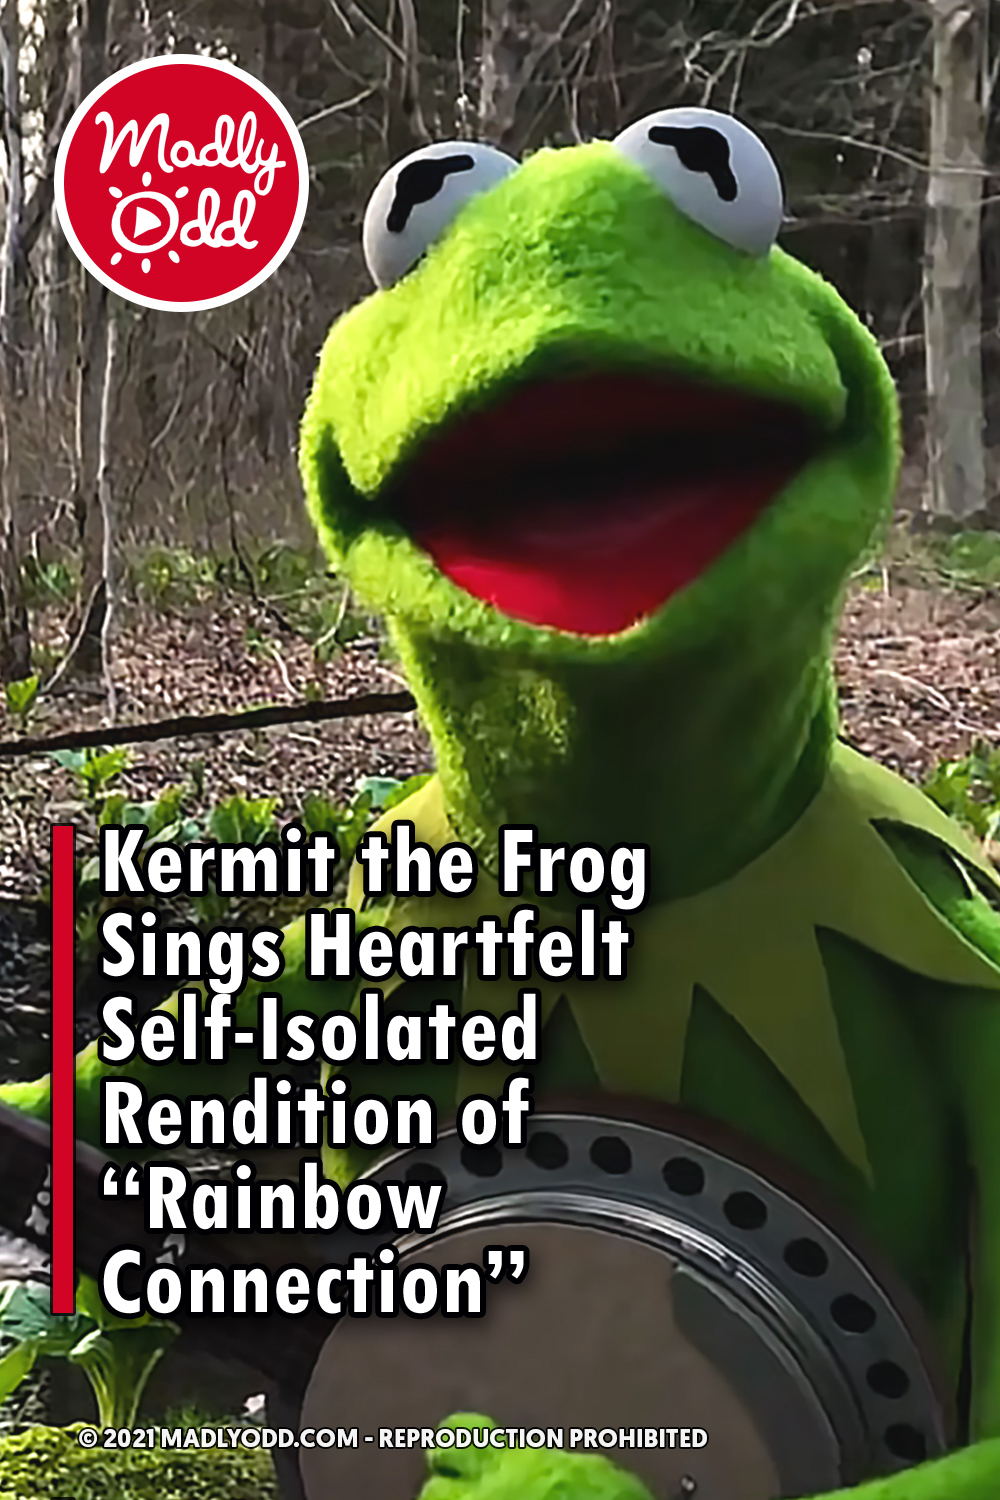 Kermit the Frog Sings Heartfelt Self-Isolated Rendition of “Rainbow Connection”